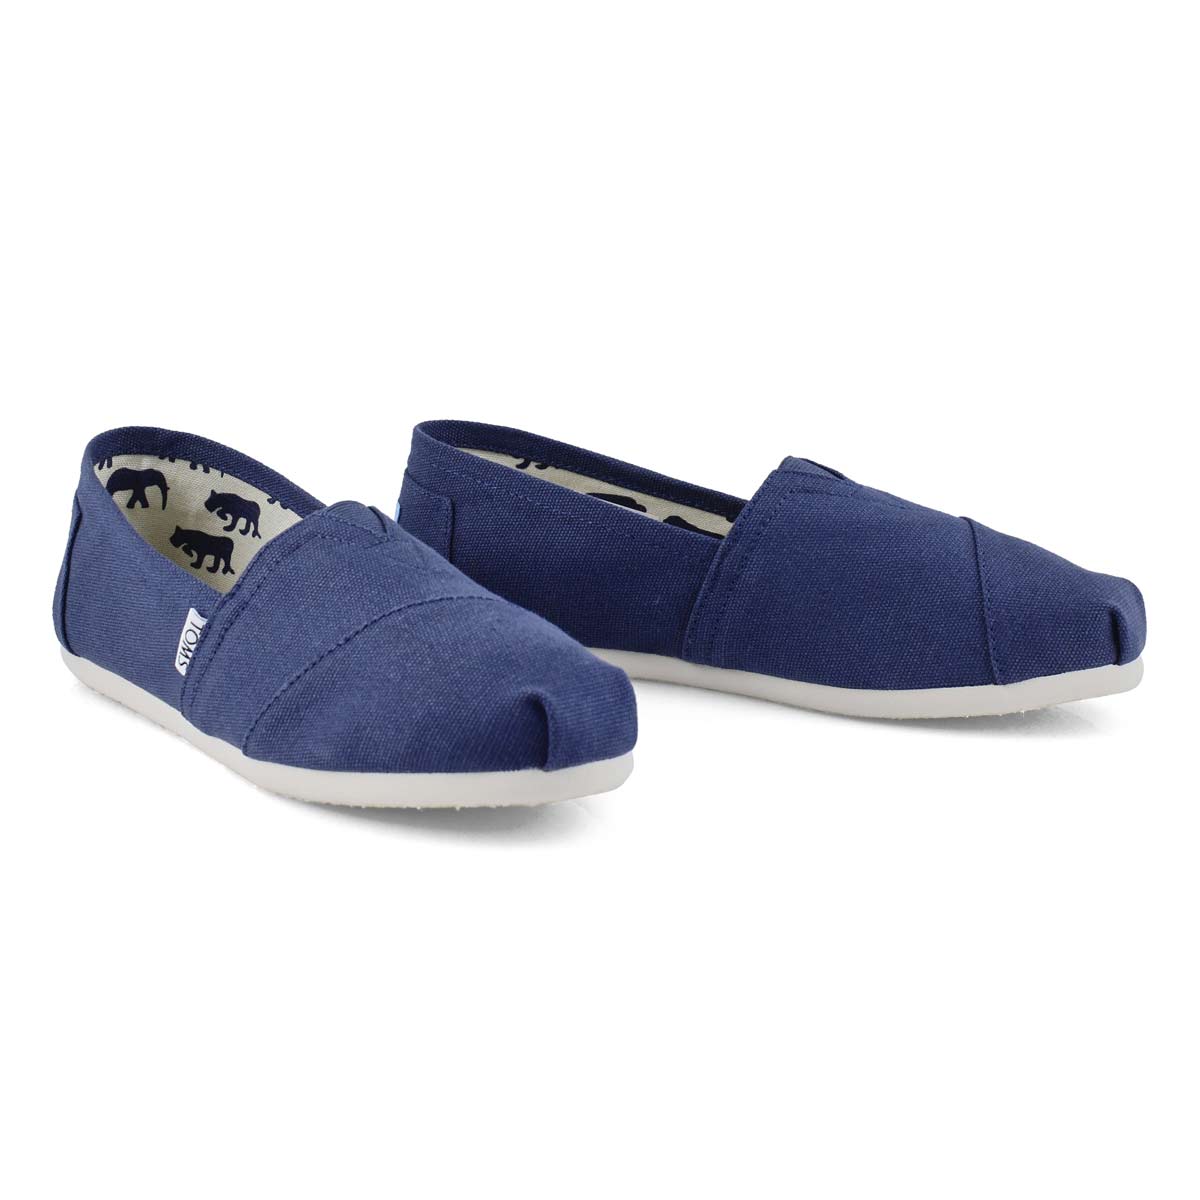 TOMS Women's CLASSIC navy canvas loafers